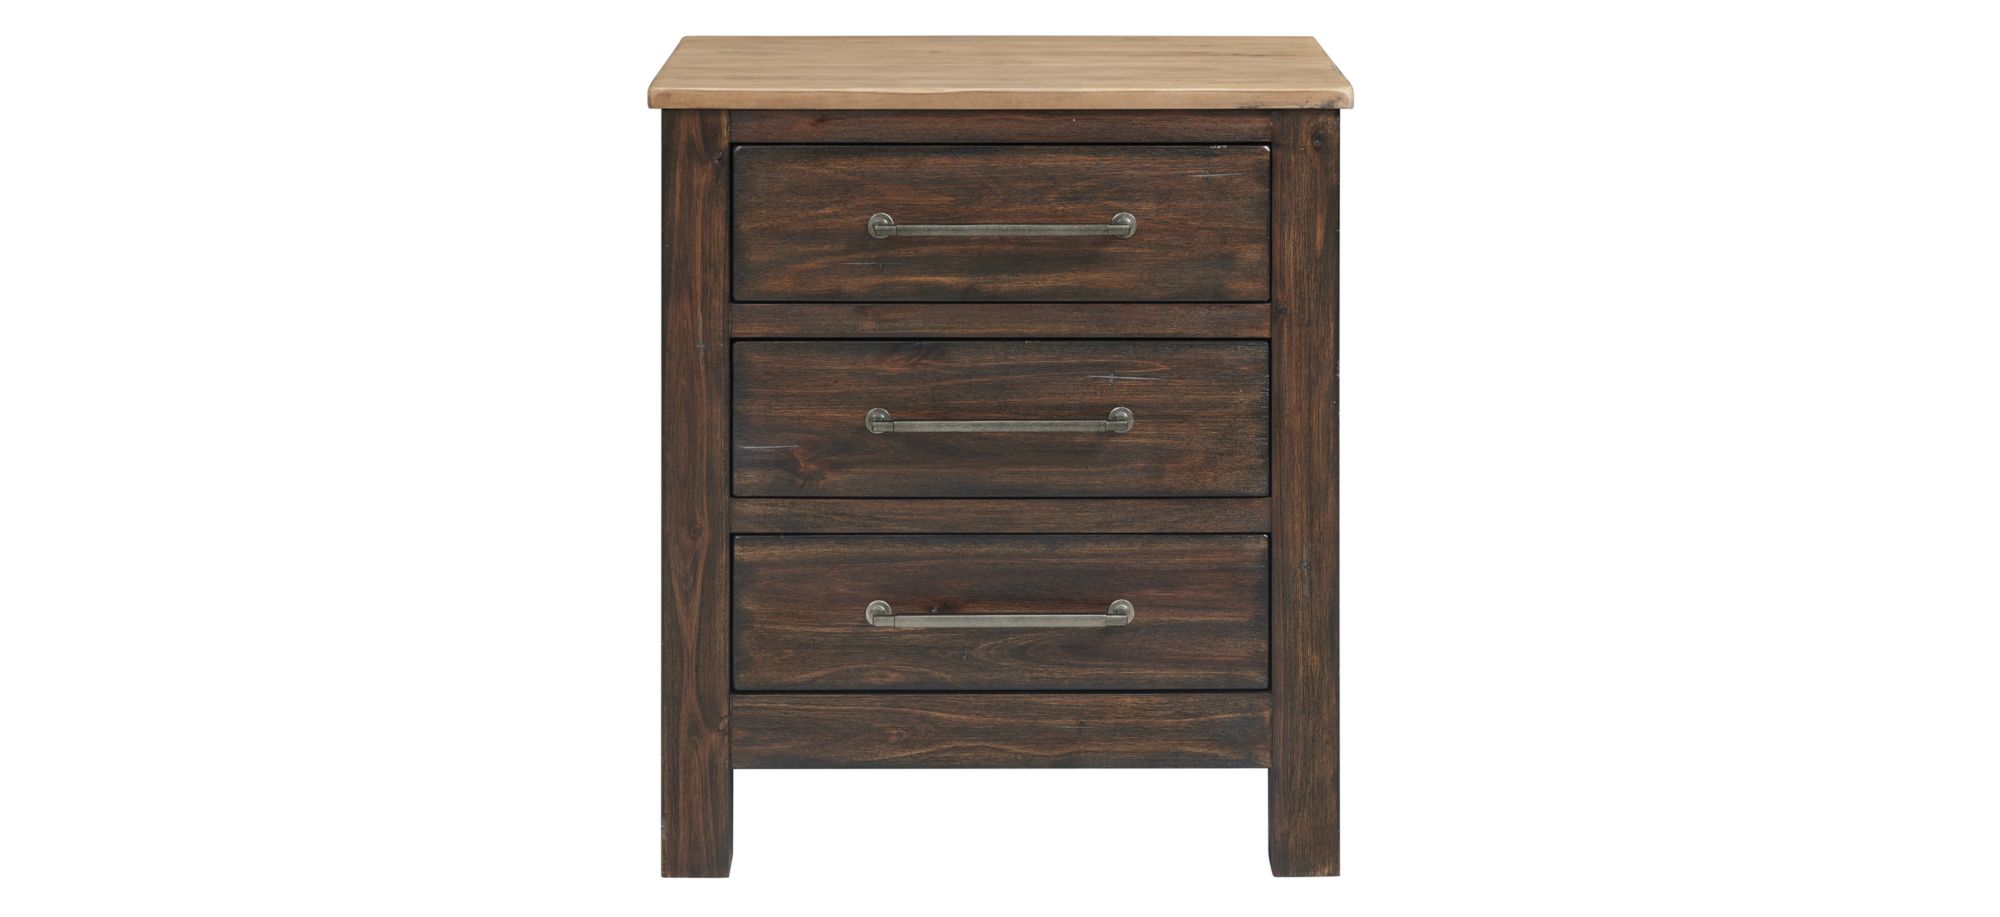 Transitions Nightstand in Driftwood and Sable by Intercon